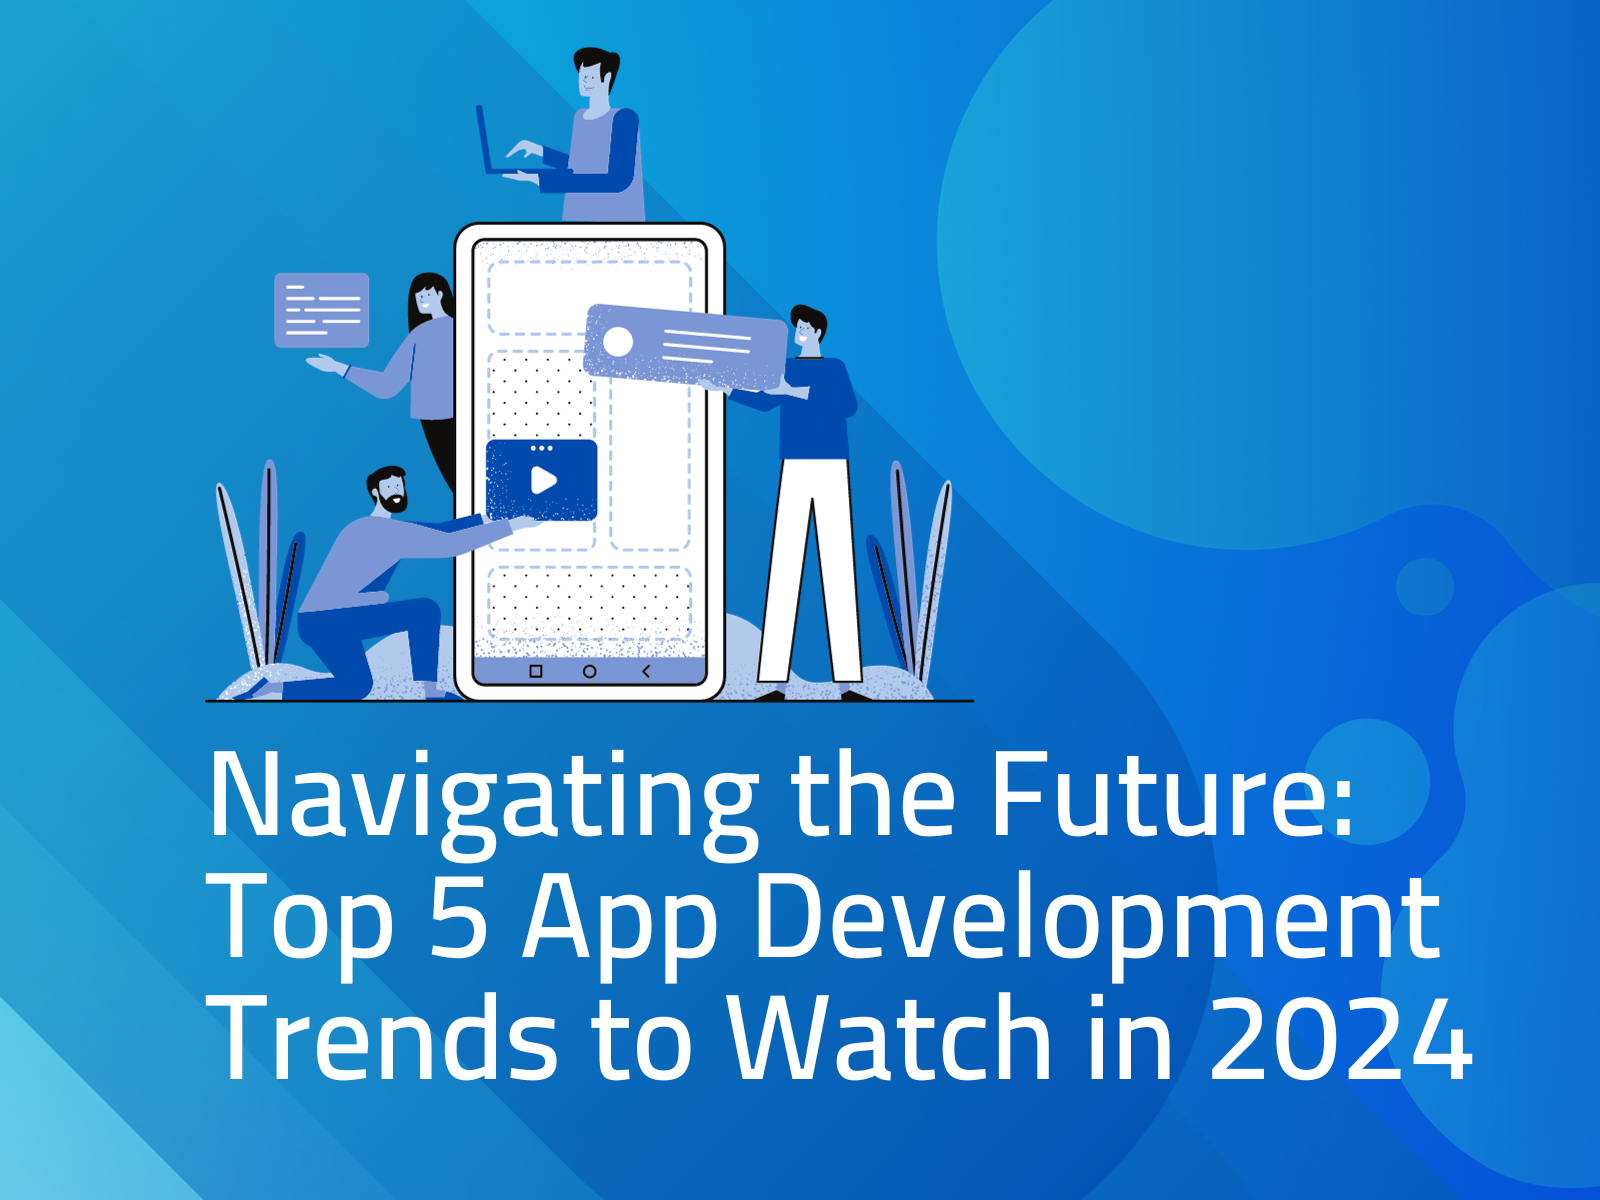 Navigating the Future Top 5 App Development Trends to Watch in 2024